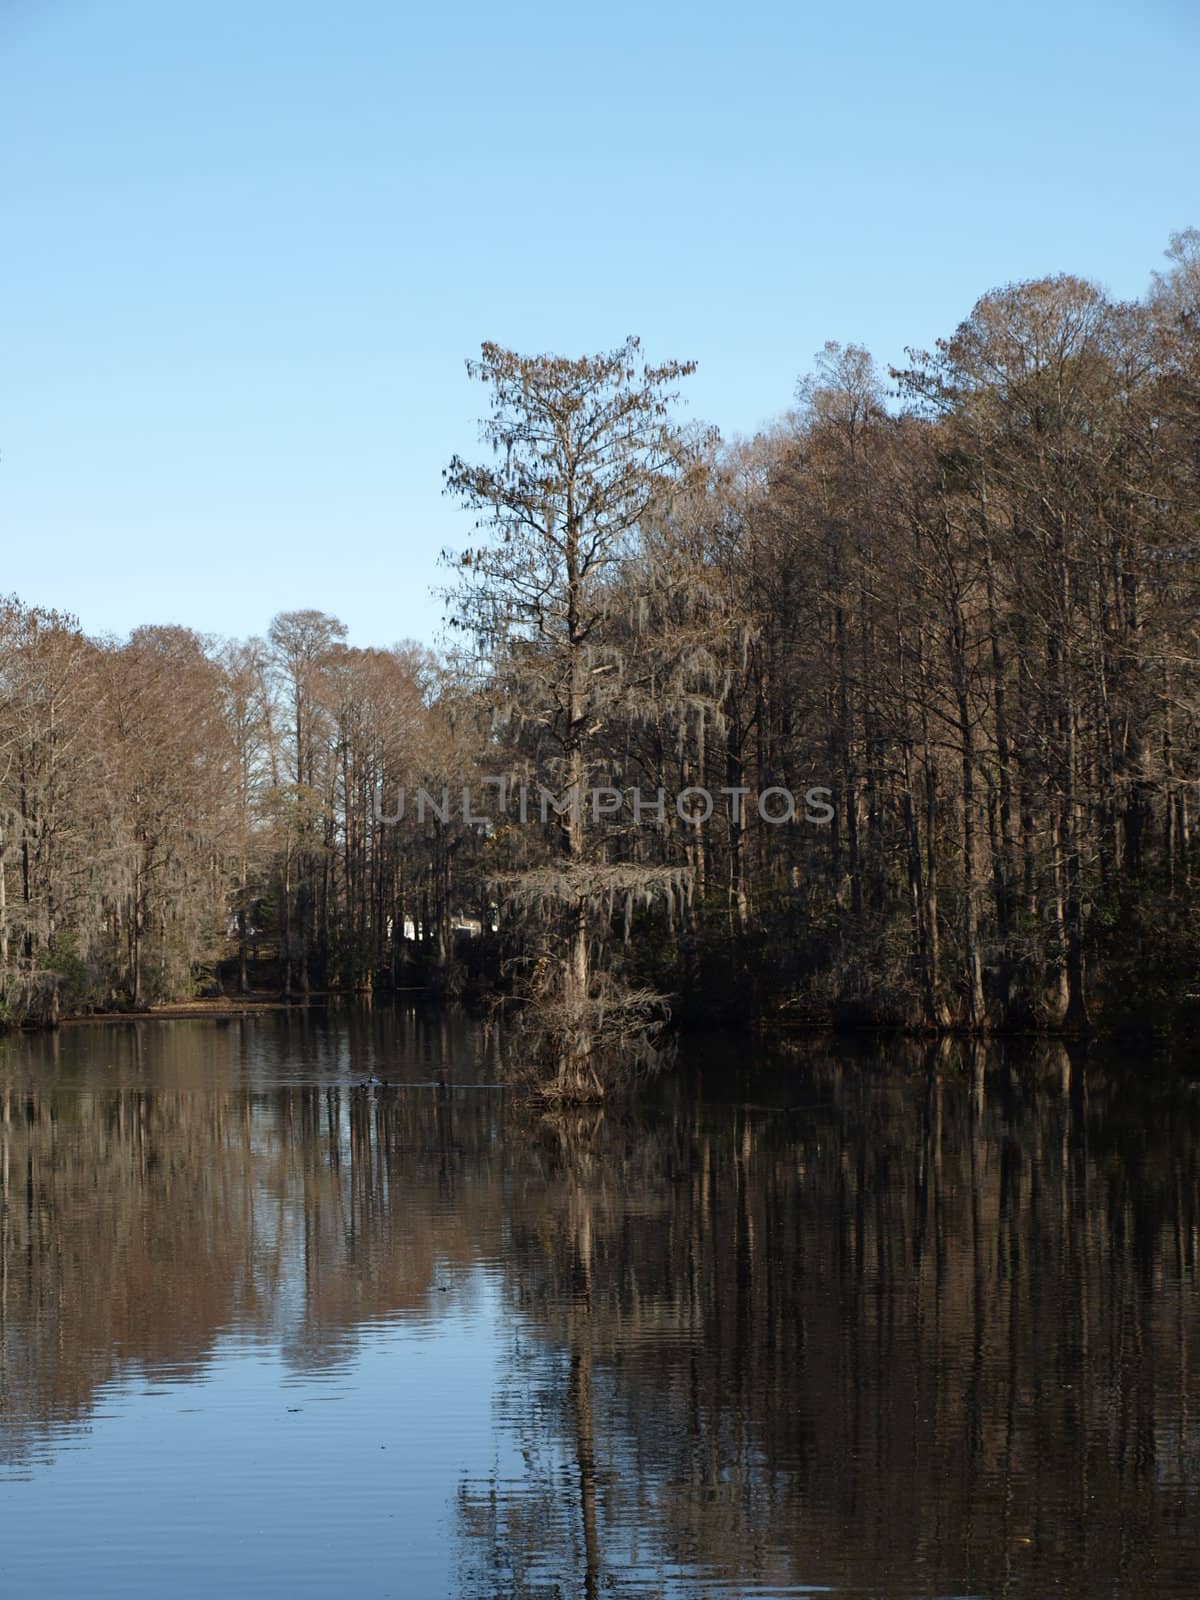 Trees along the shore of a swampy lake during the winter